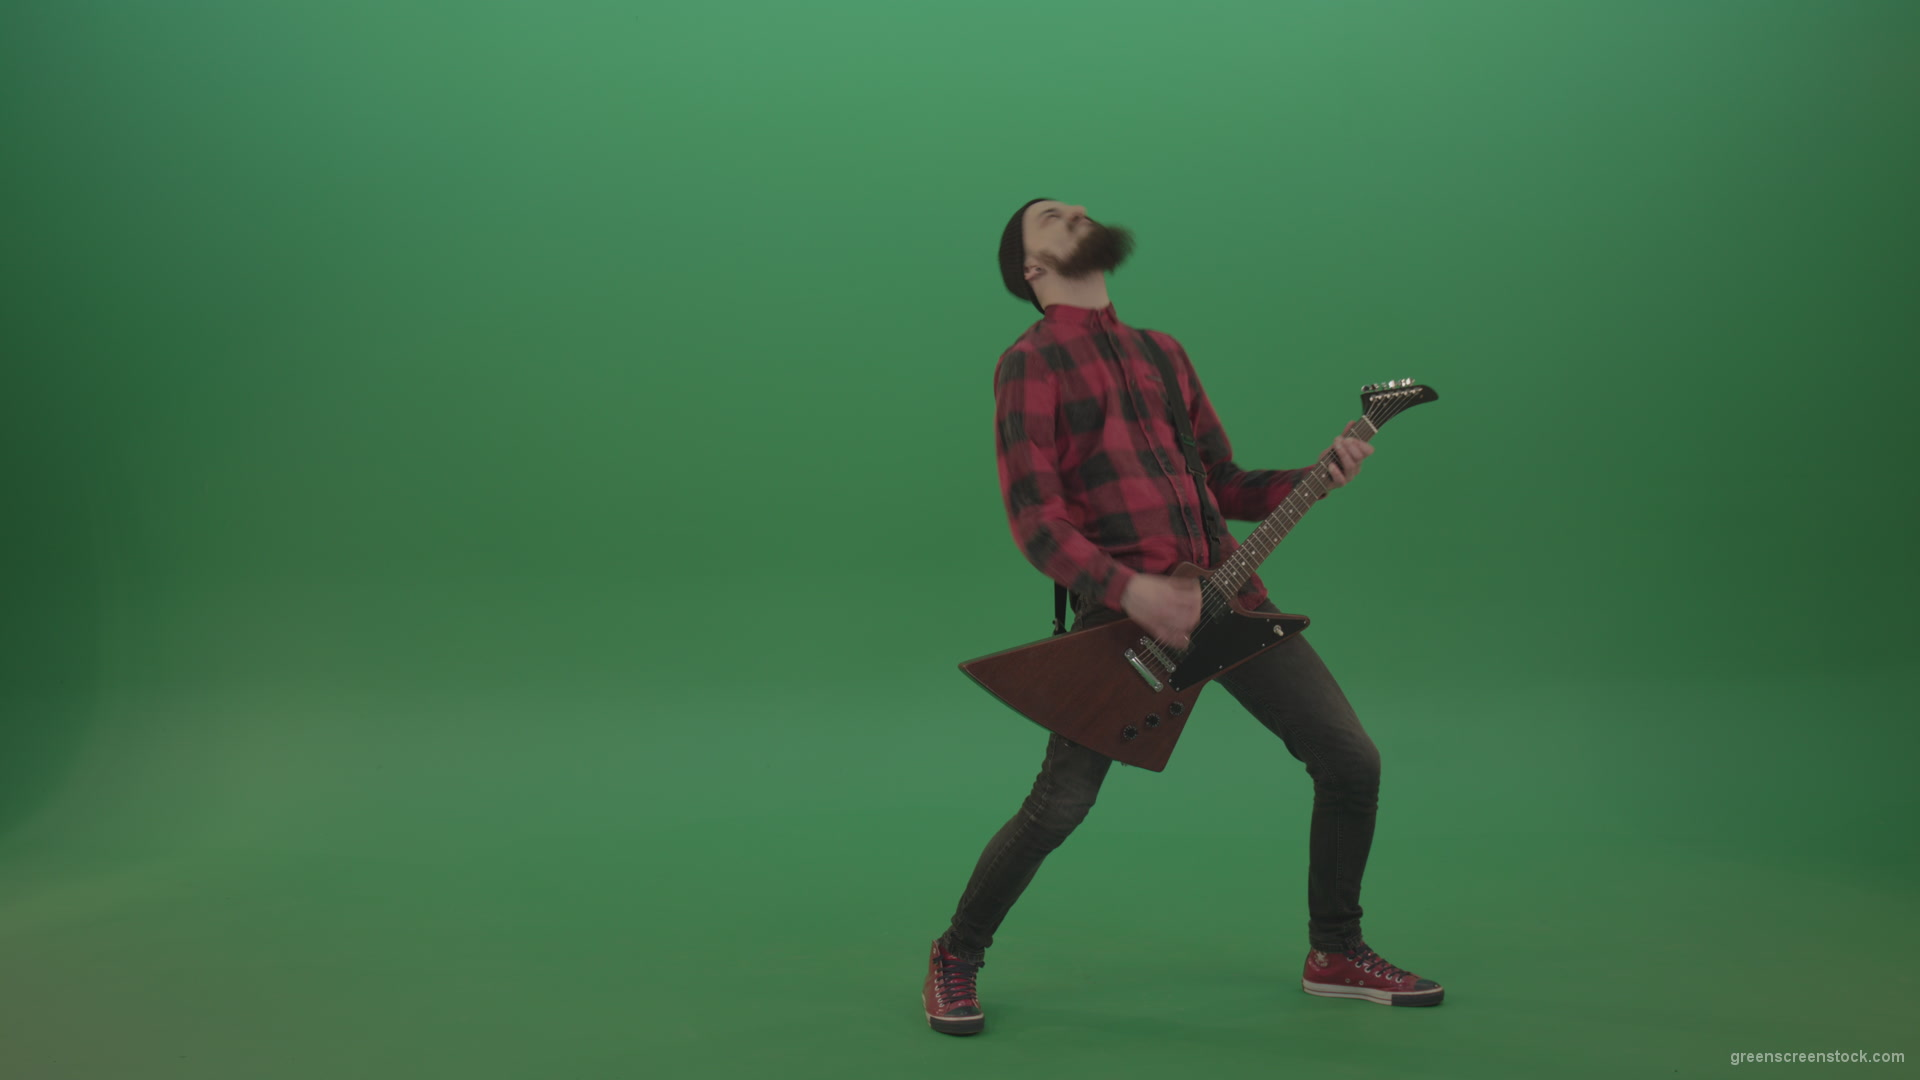 Punk-rock-full-size-man-guitarist-play-guitar-with-emotions-on-green-screen_002 Green Screen Stock